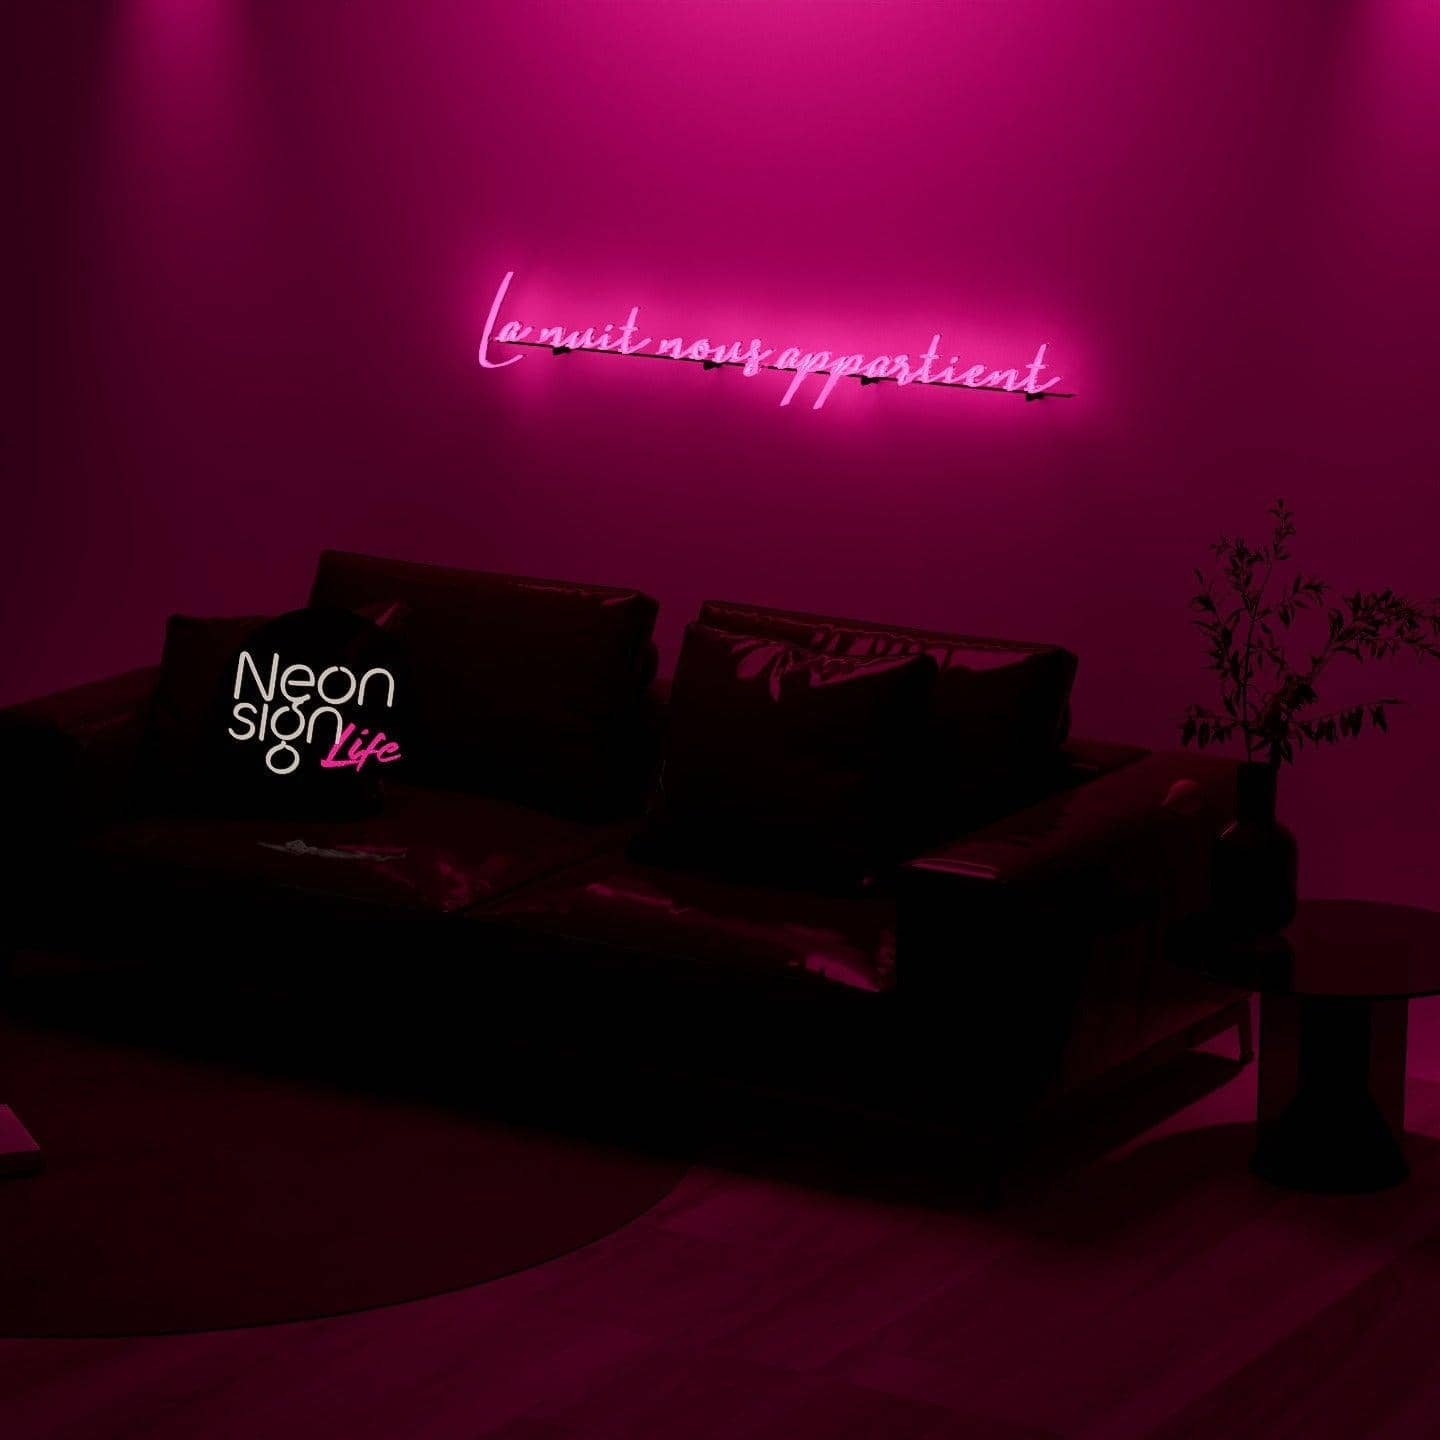 dark-night-lit-pink-neon-lights-hanging-on-the-wall-for-display-la-nuit-nous-appartient-la-nuit-nous-appartient